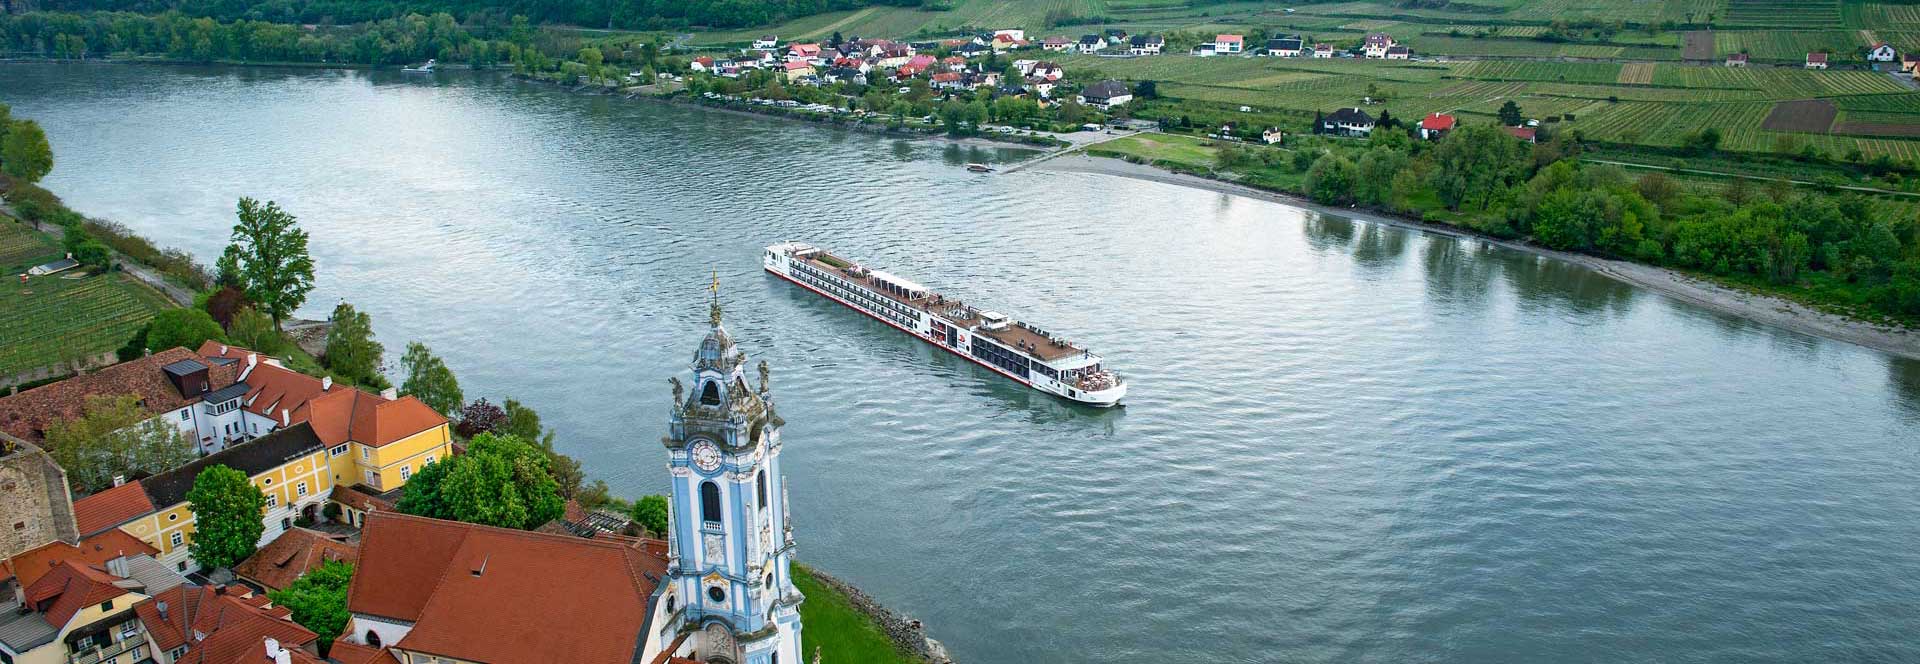 Viking River Cruises Deals on all 2023/2024 Vacations 2234 Reviews